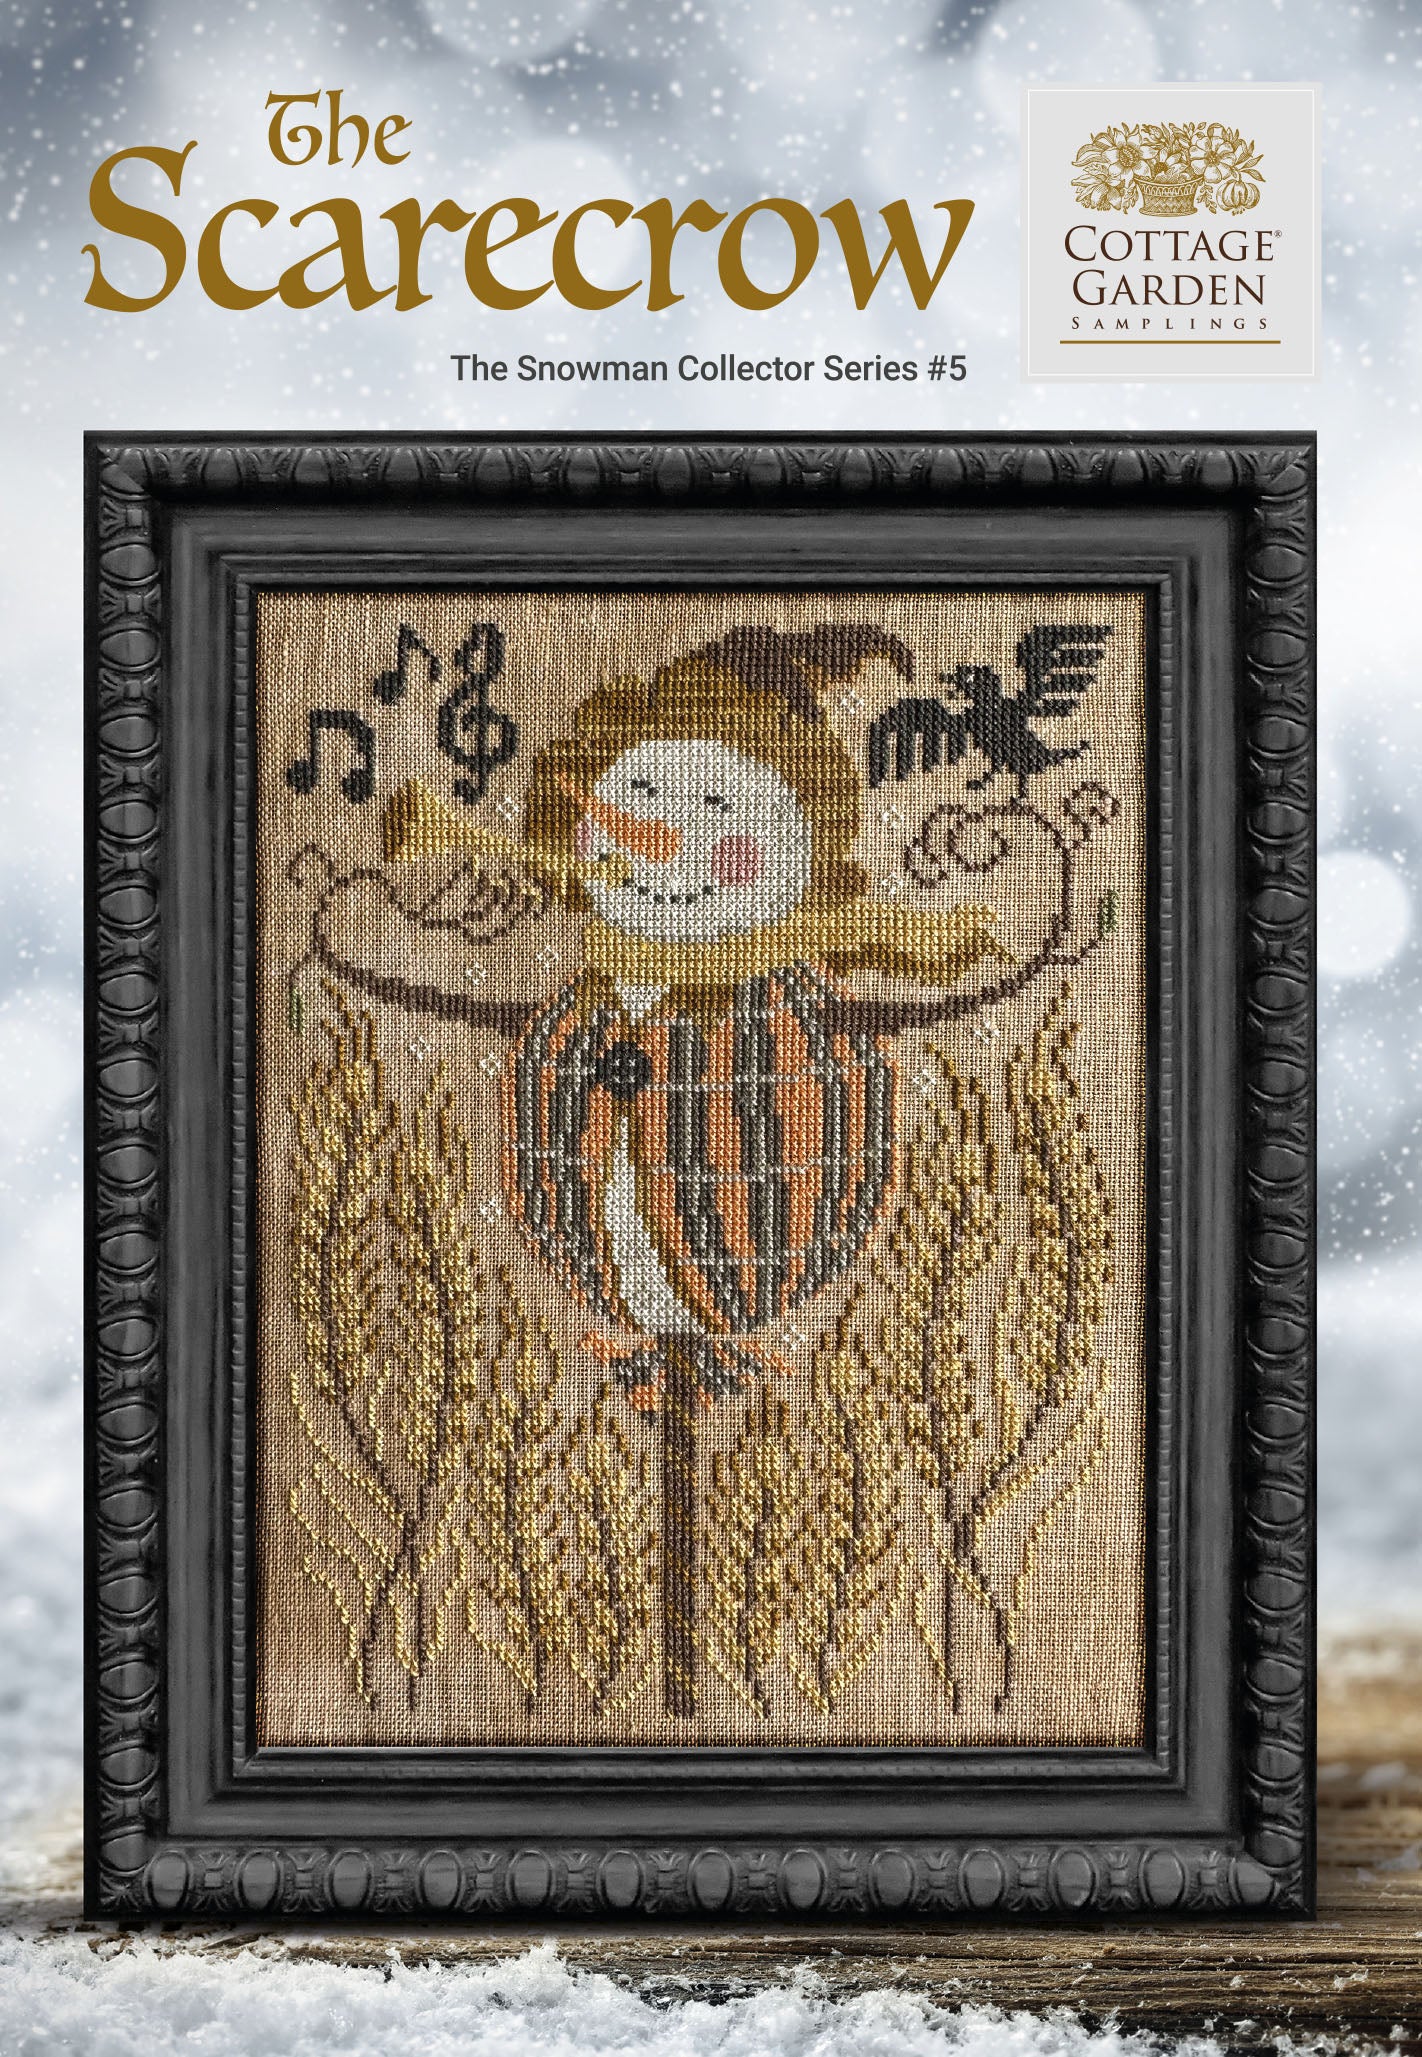 The Scarecrow by Cottage Garden Samplings